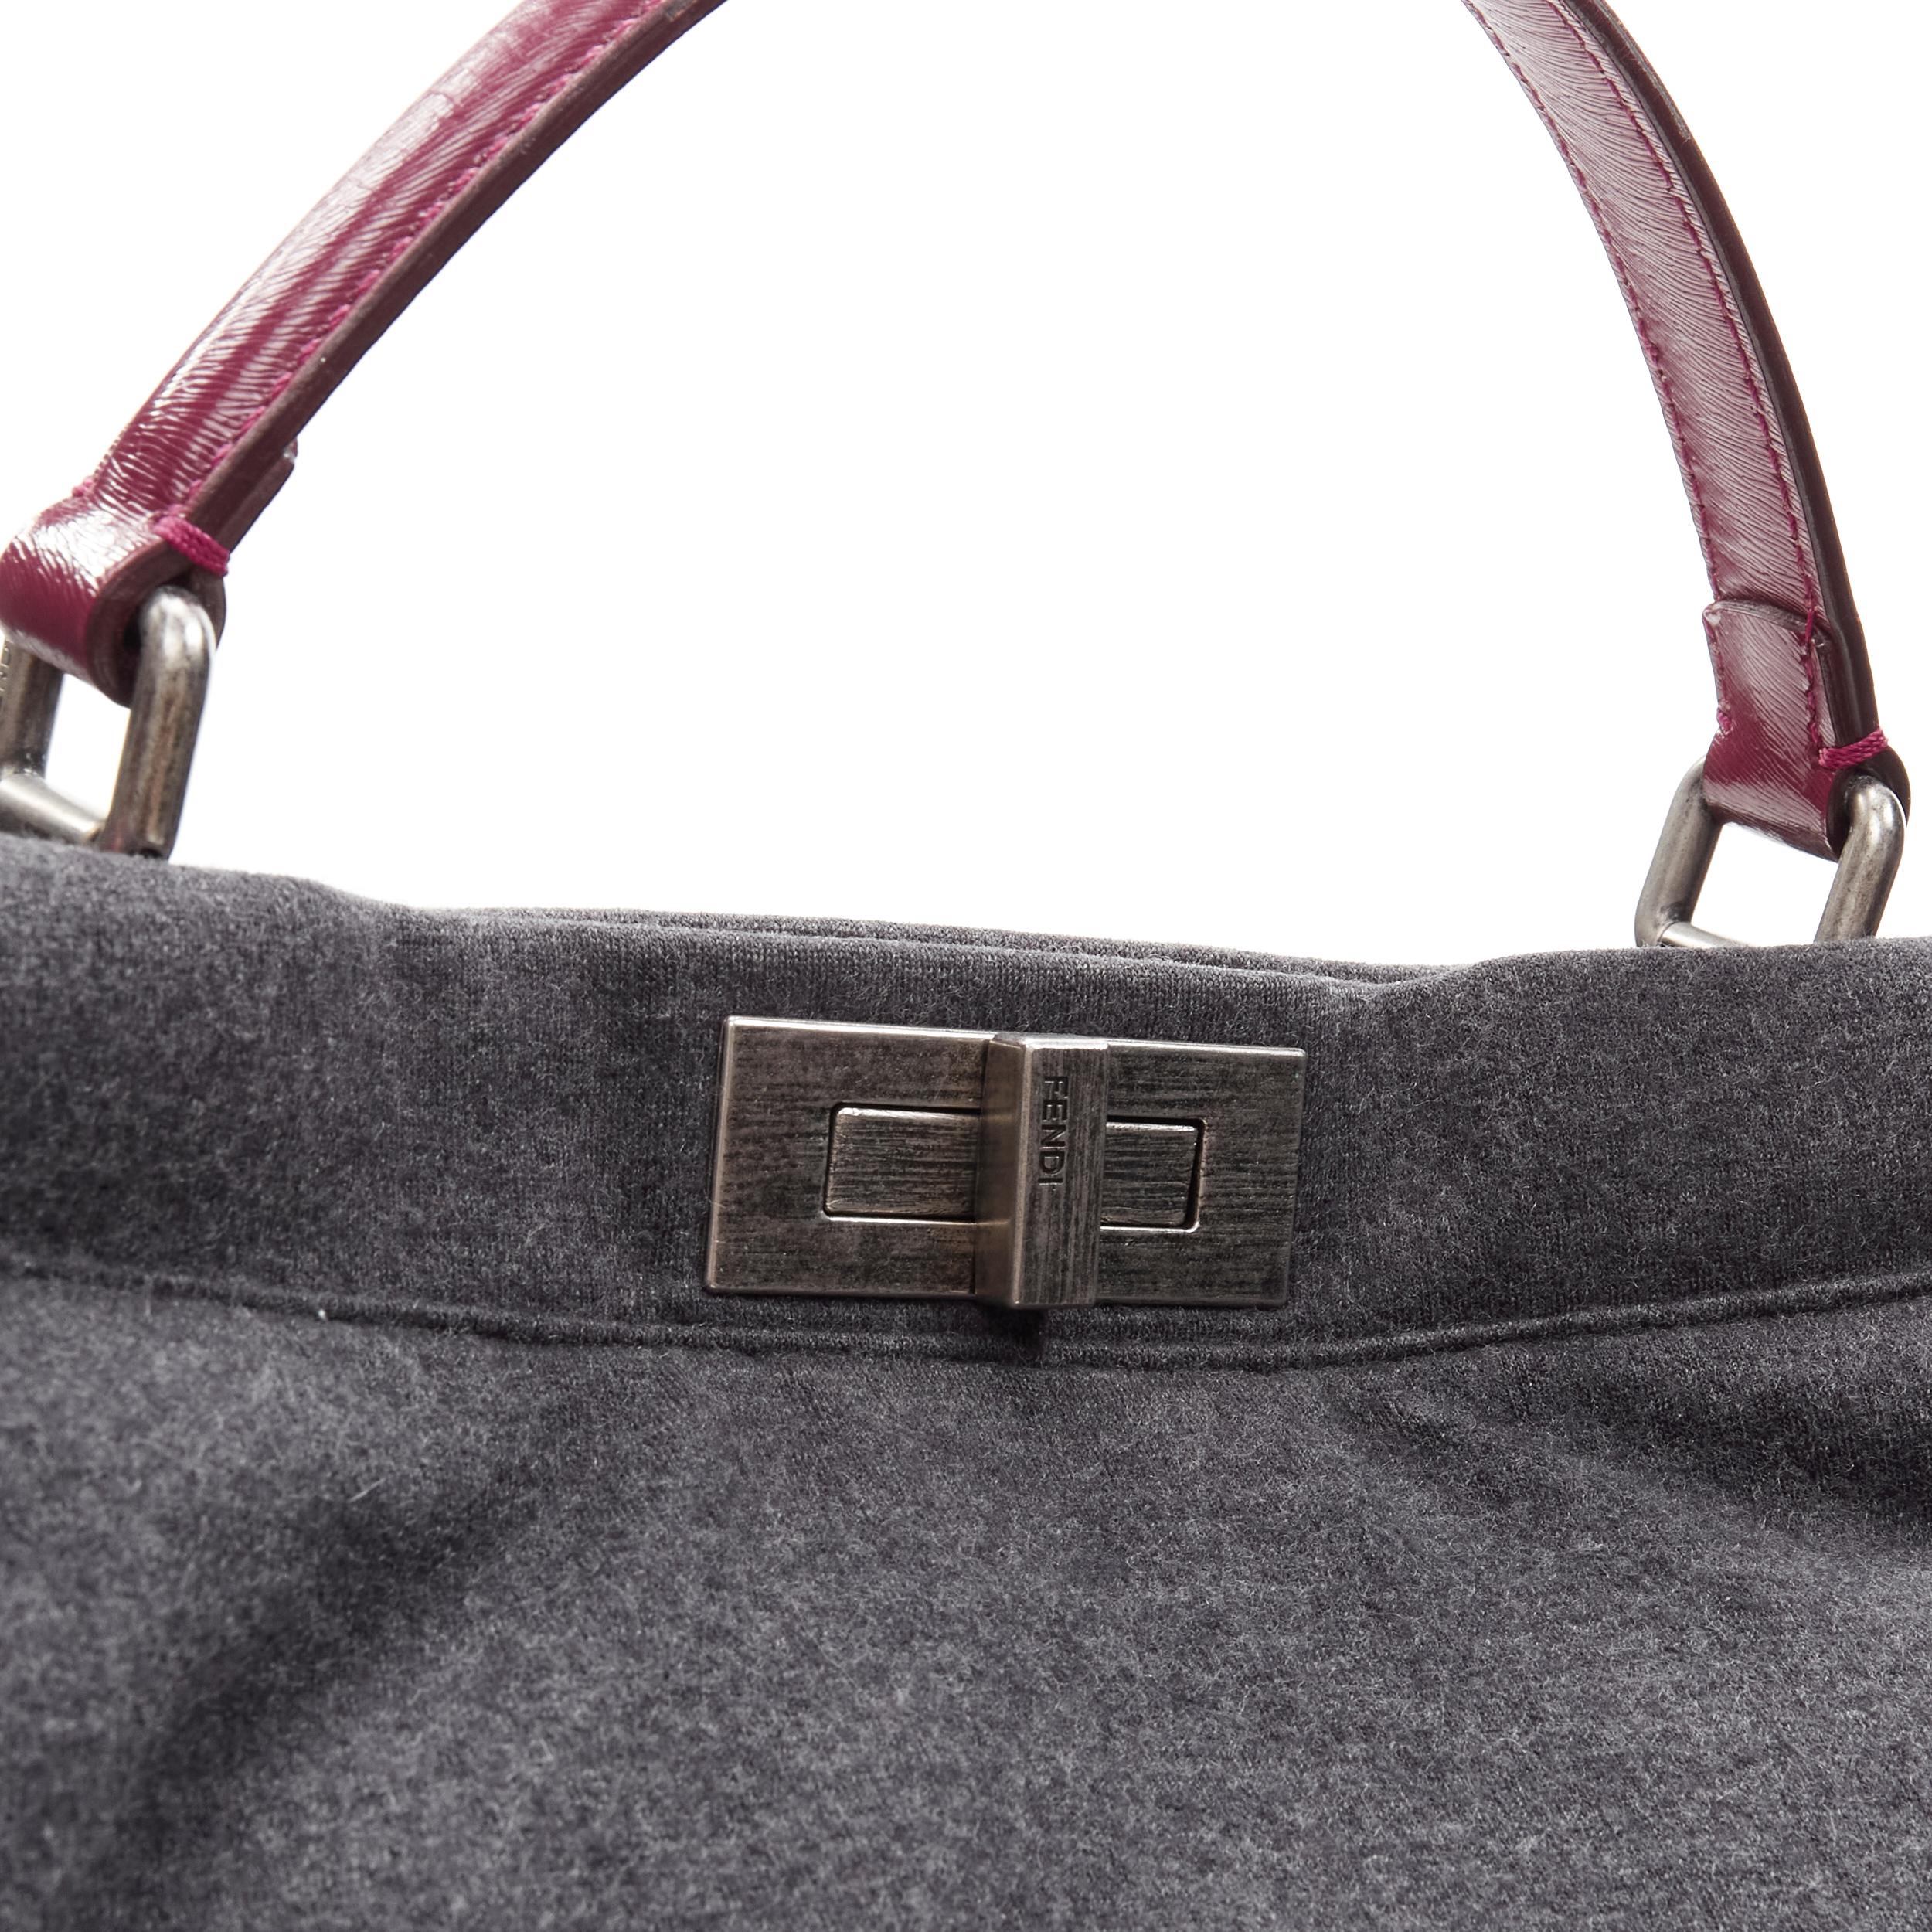 rare FENDI Peekaboo grey wool burgundy textured leather shoulder satchel bag In Excellent Condition For Sale In Hong Kong, NT